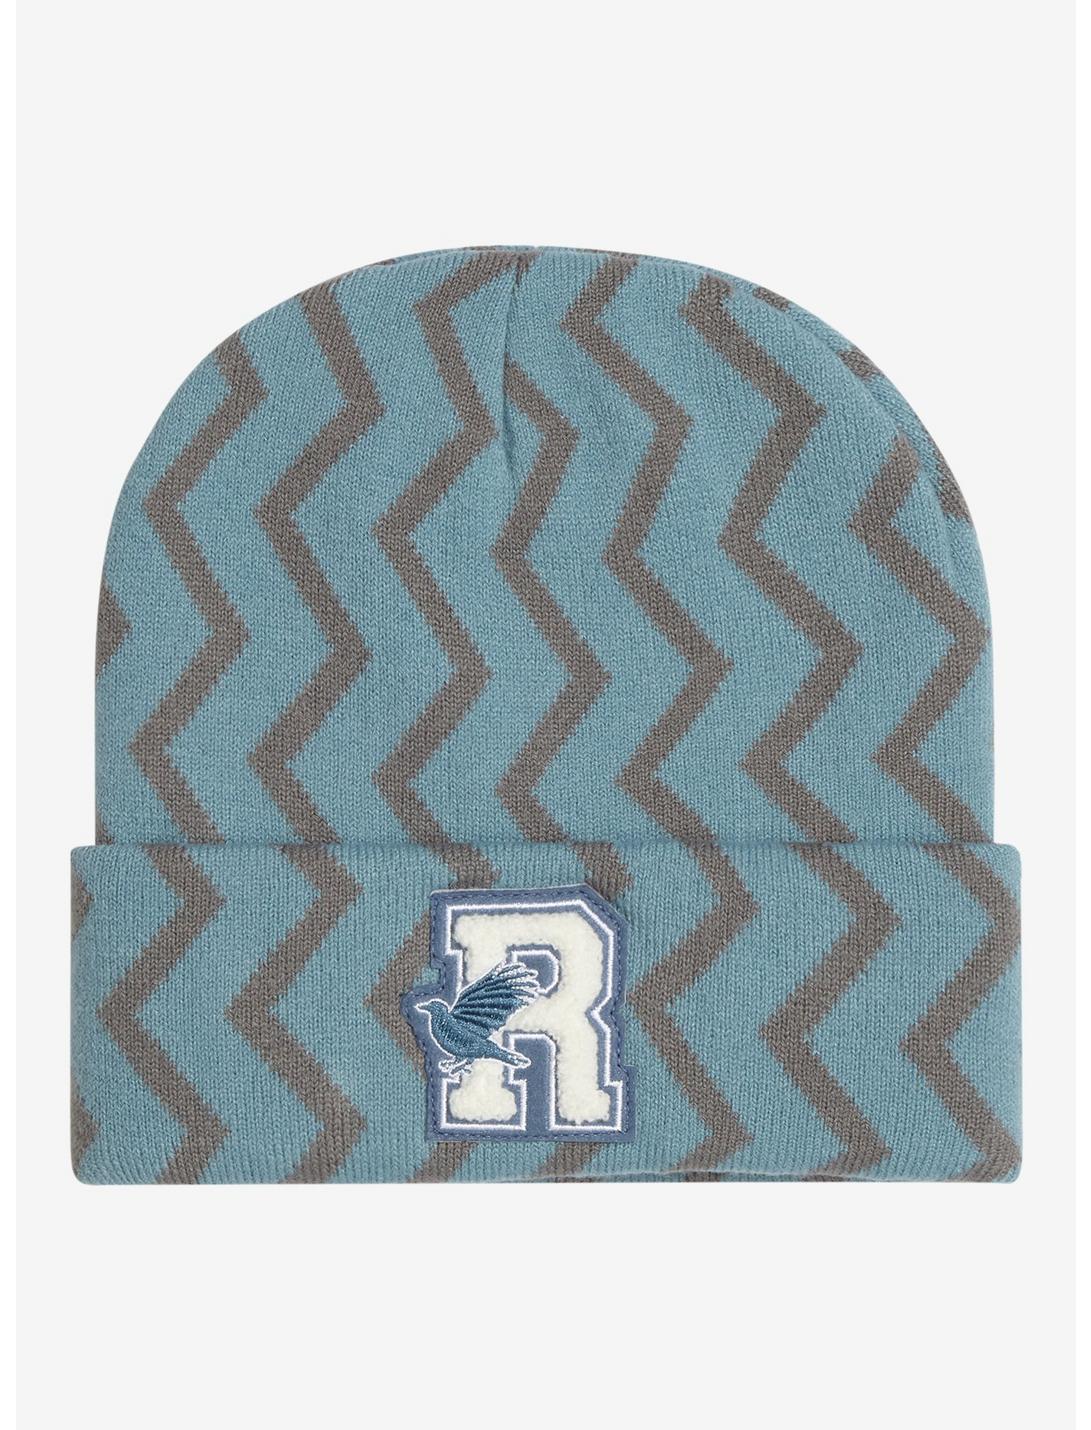 Harry Potter Ravenclaw Zig Zag Patterned Cuff Beanie - BoxLunch Exclusive, , hi-res